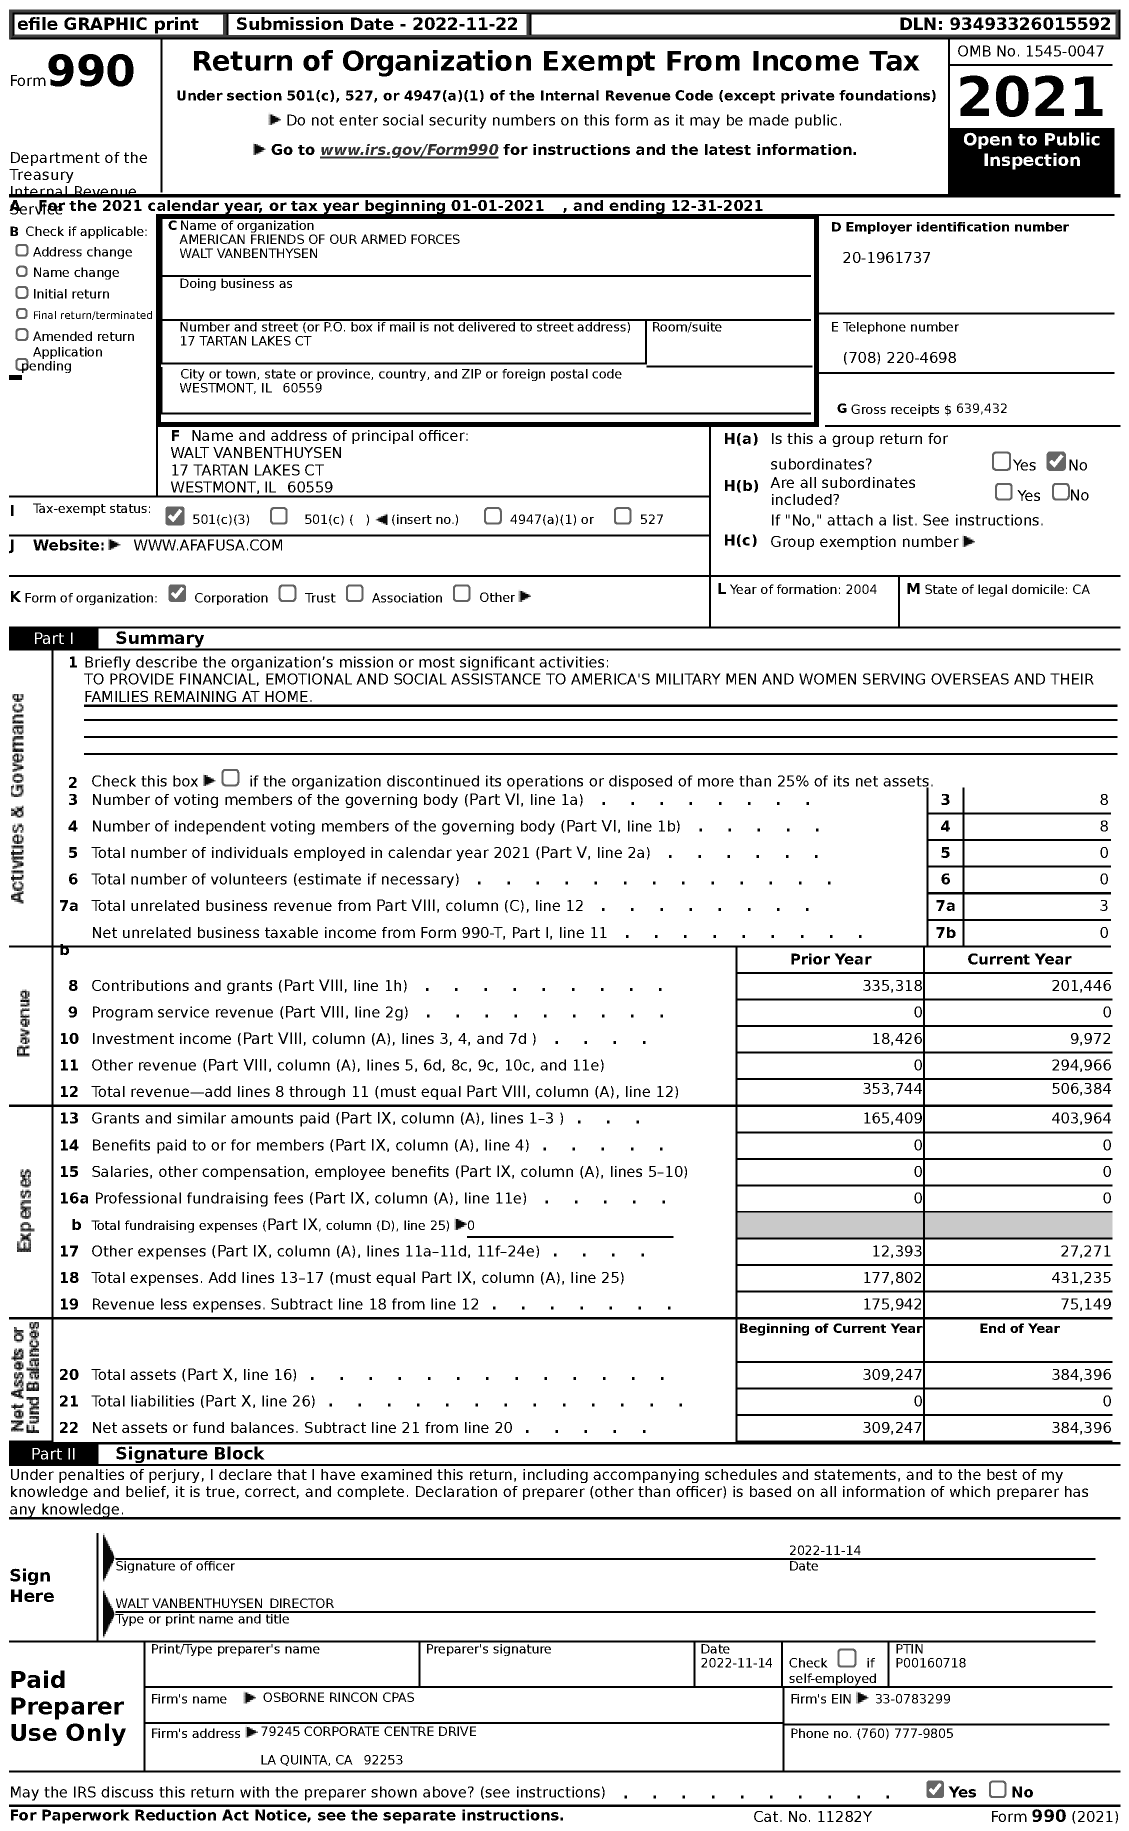 Image of first page of 2021 Form 990 for American Friends of Our Armed Forces Walt Vanbenthysen